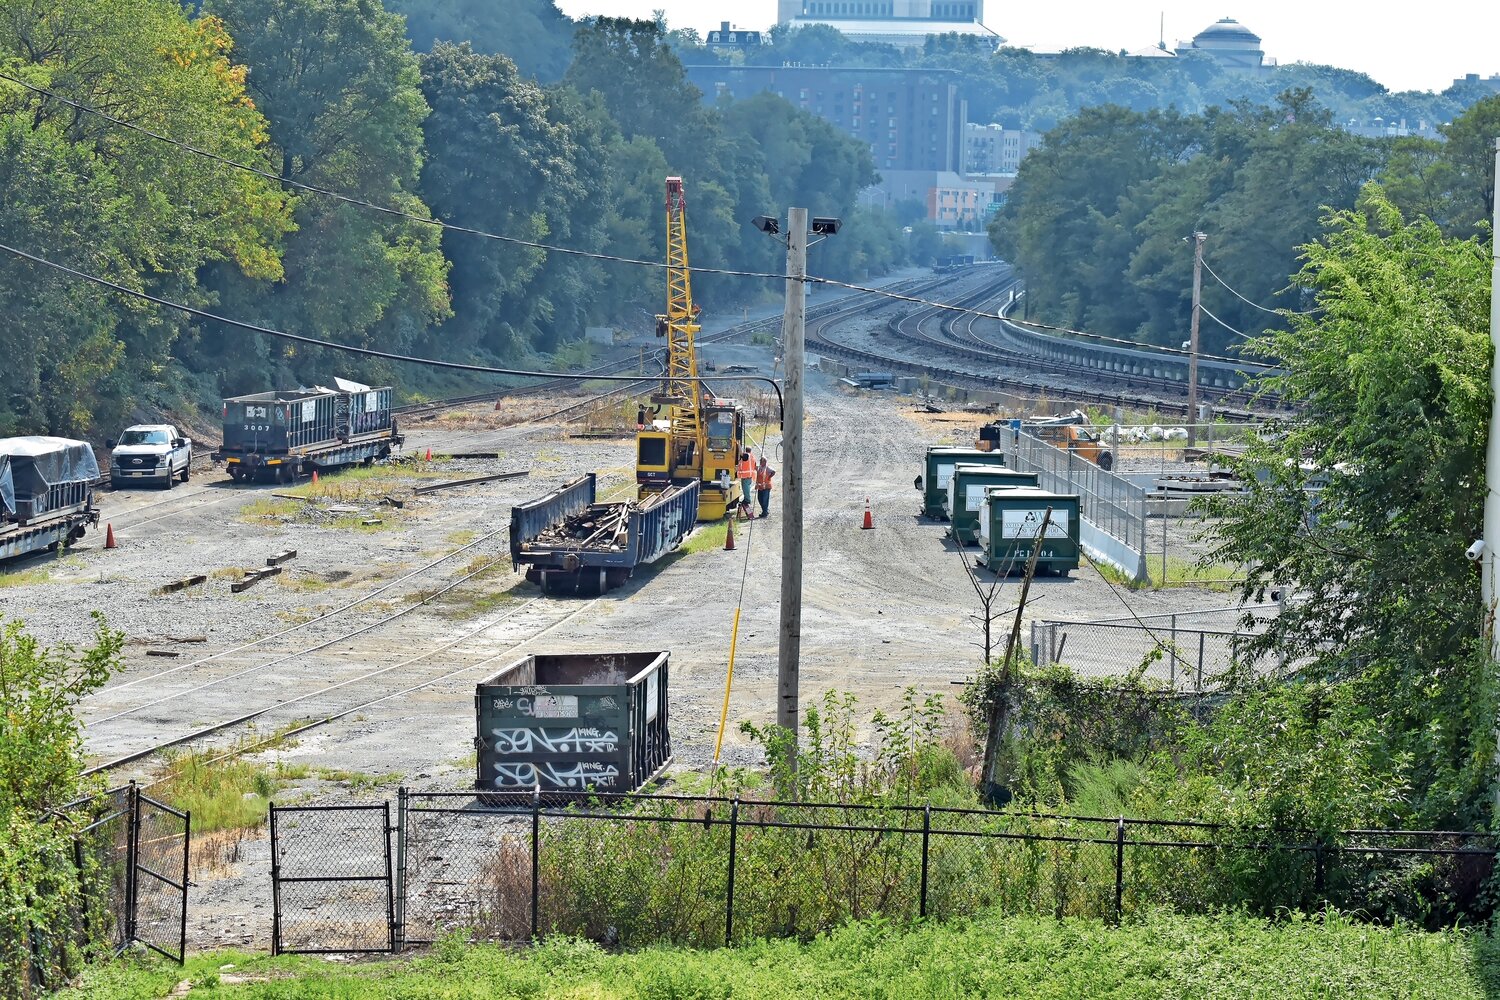 A cleared section of property along the Putnam greenway extension shows Metro-North employees working on a transfer station.